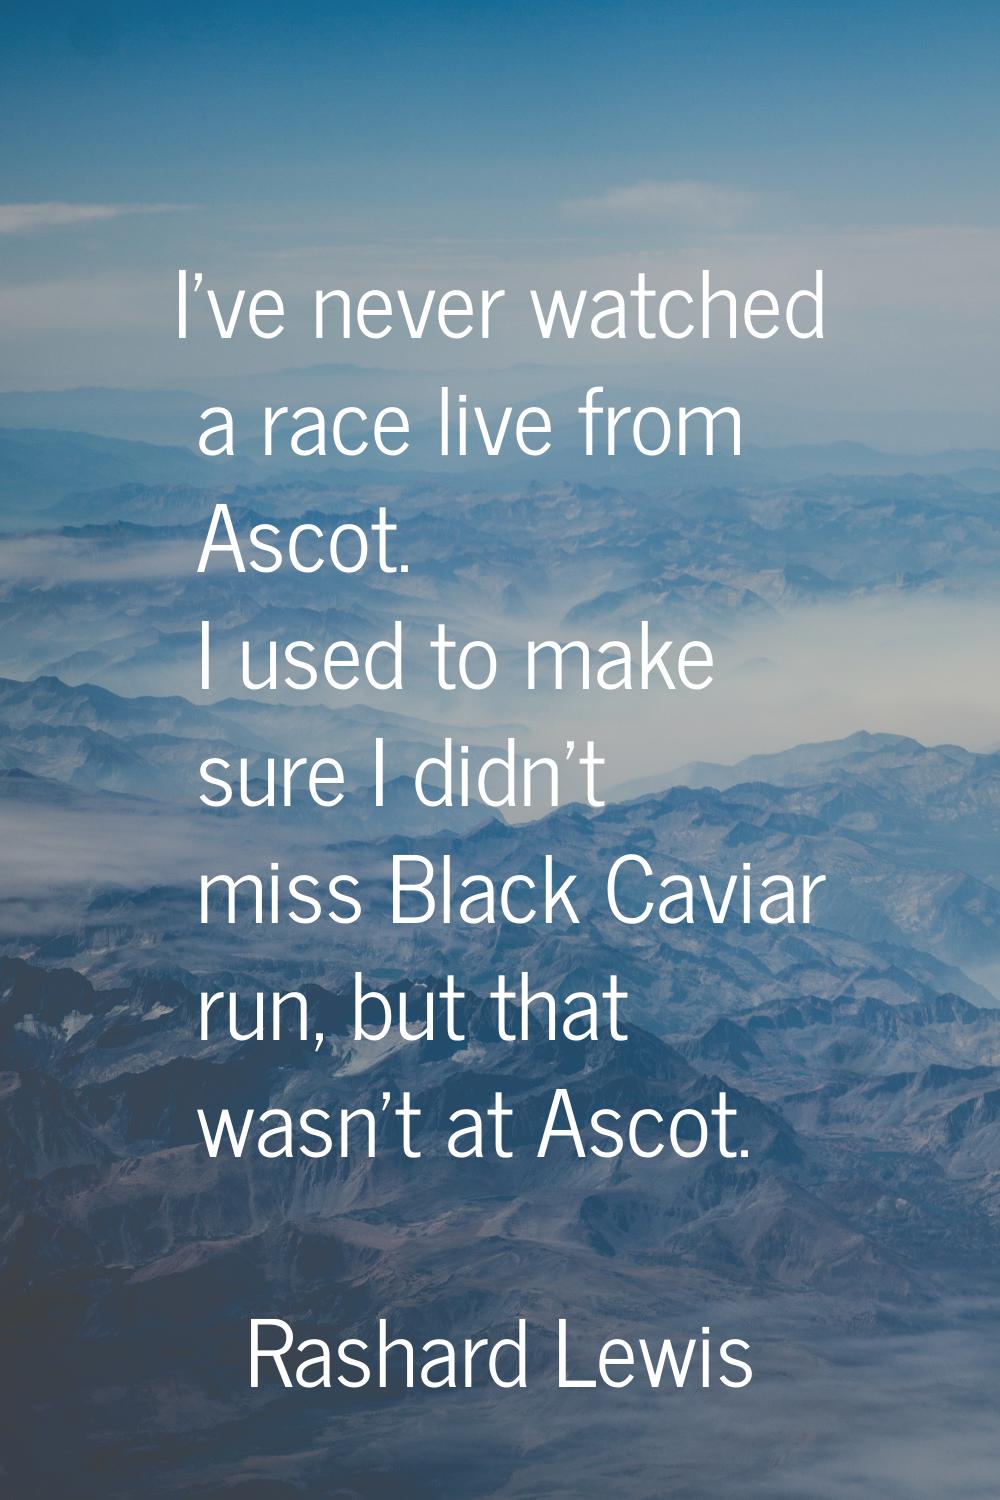 I've never watched a race live from Ascot. I used to make sure I didn't miss Black Caviar run, but 